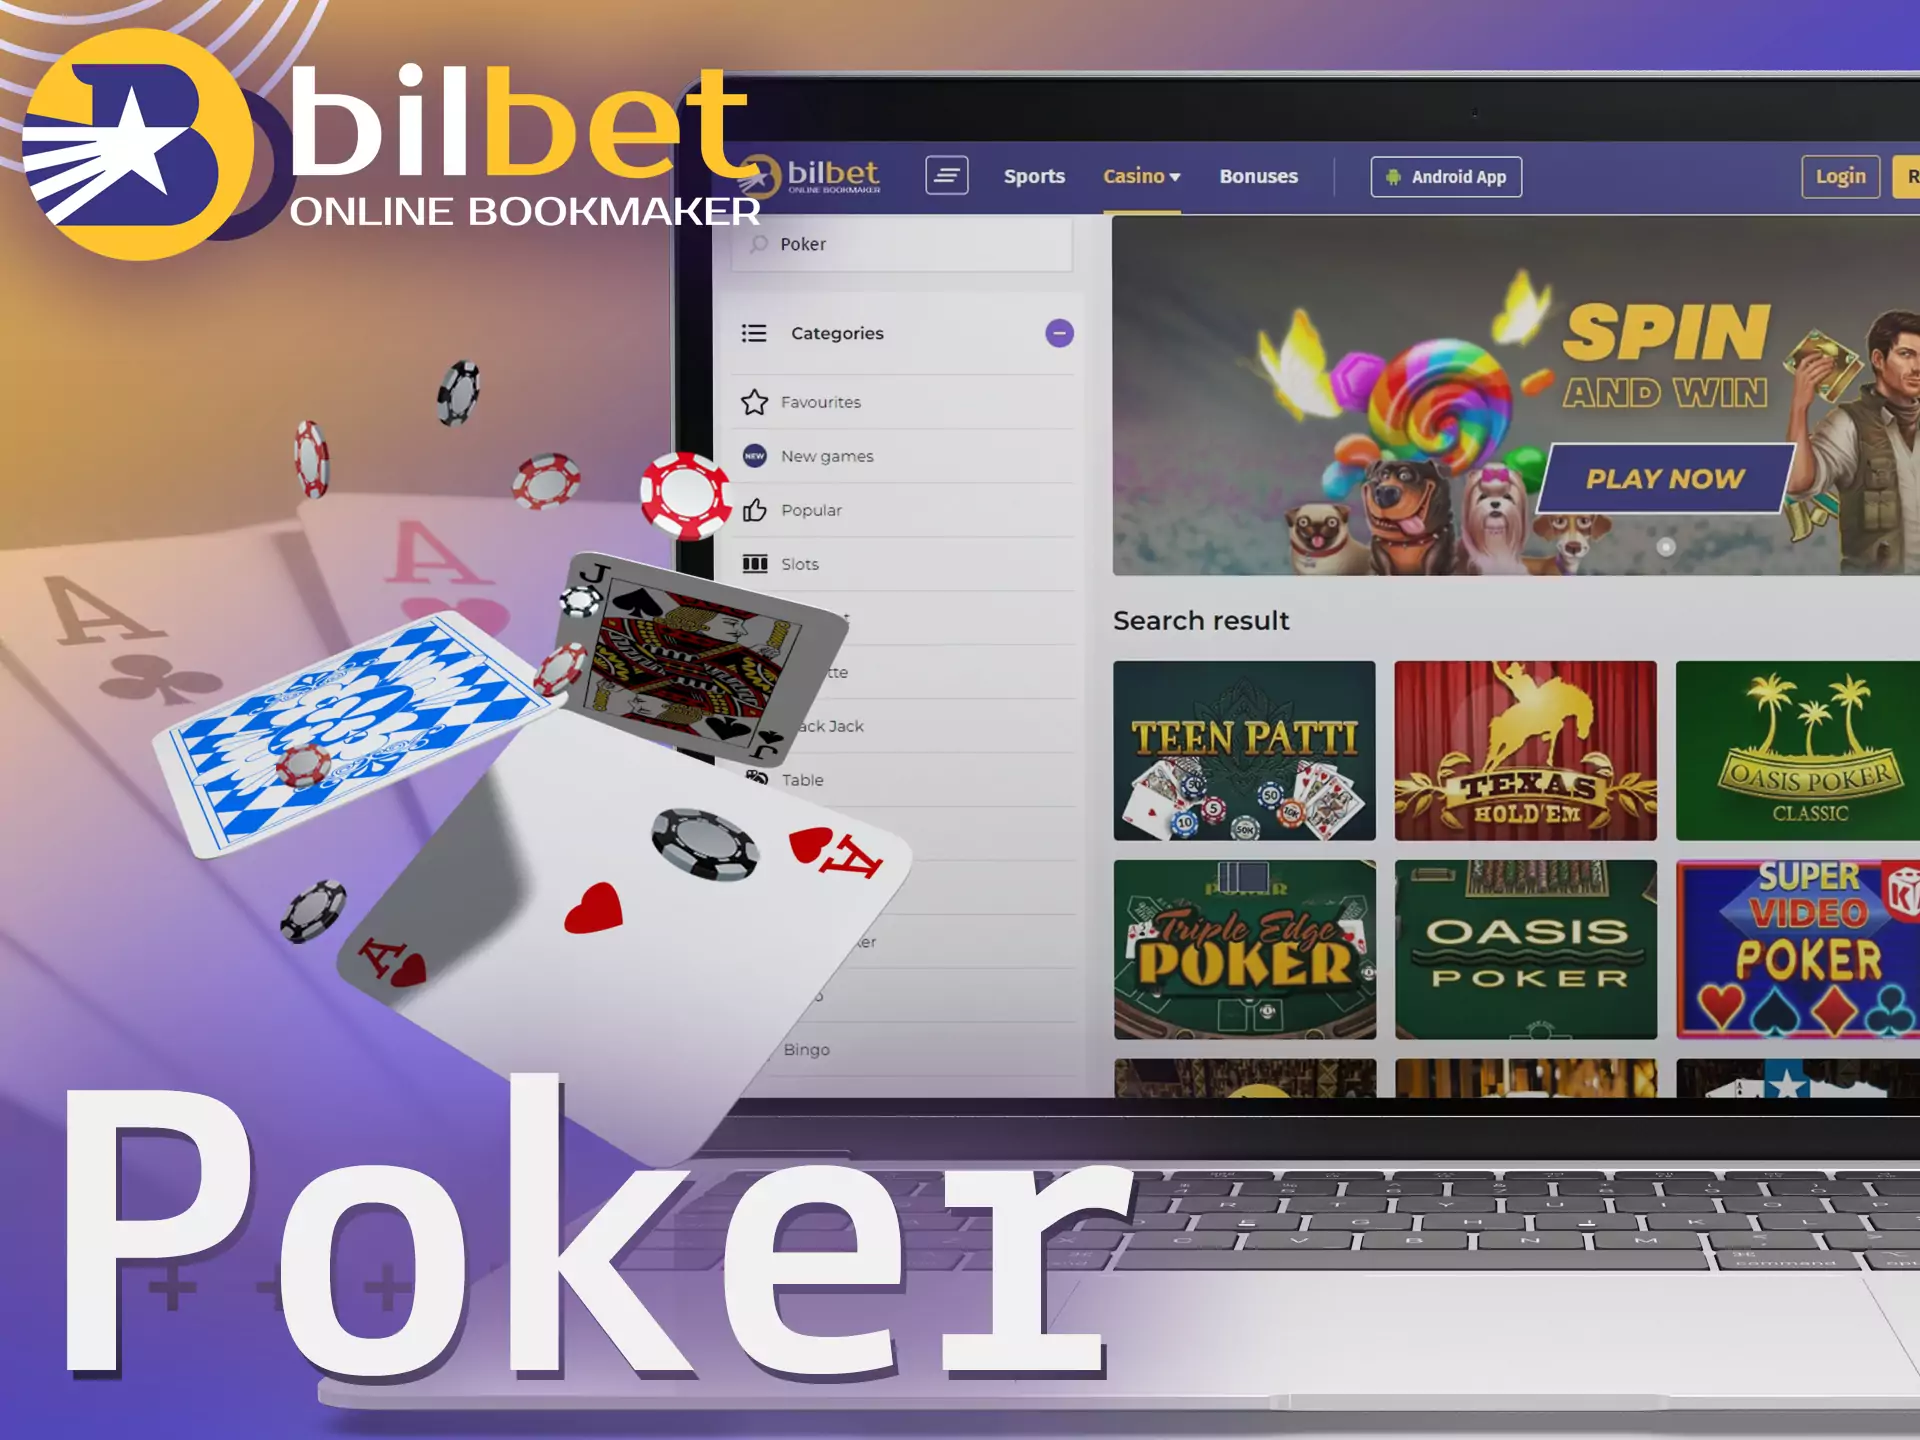 In the Bilbet Casino, many players choose poker rooms.